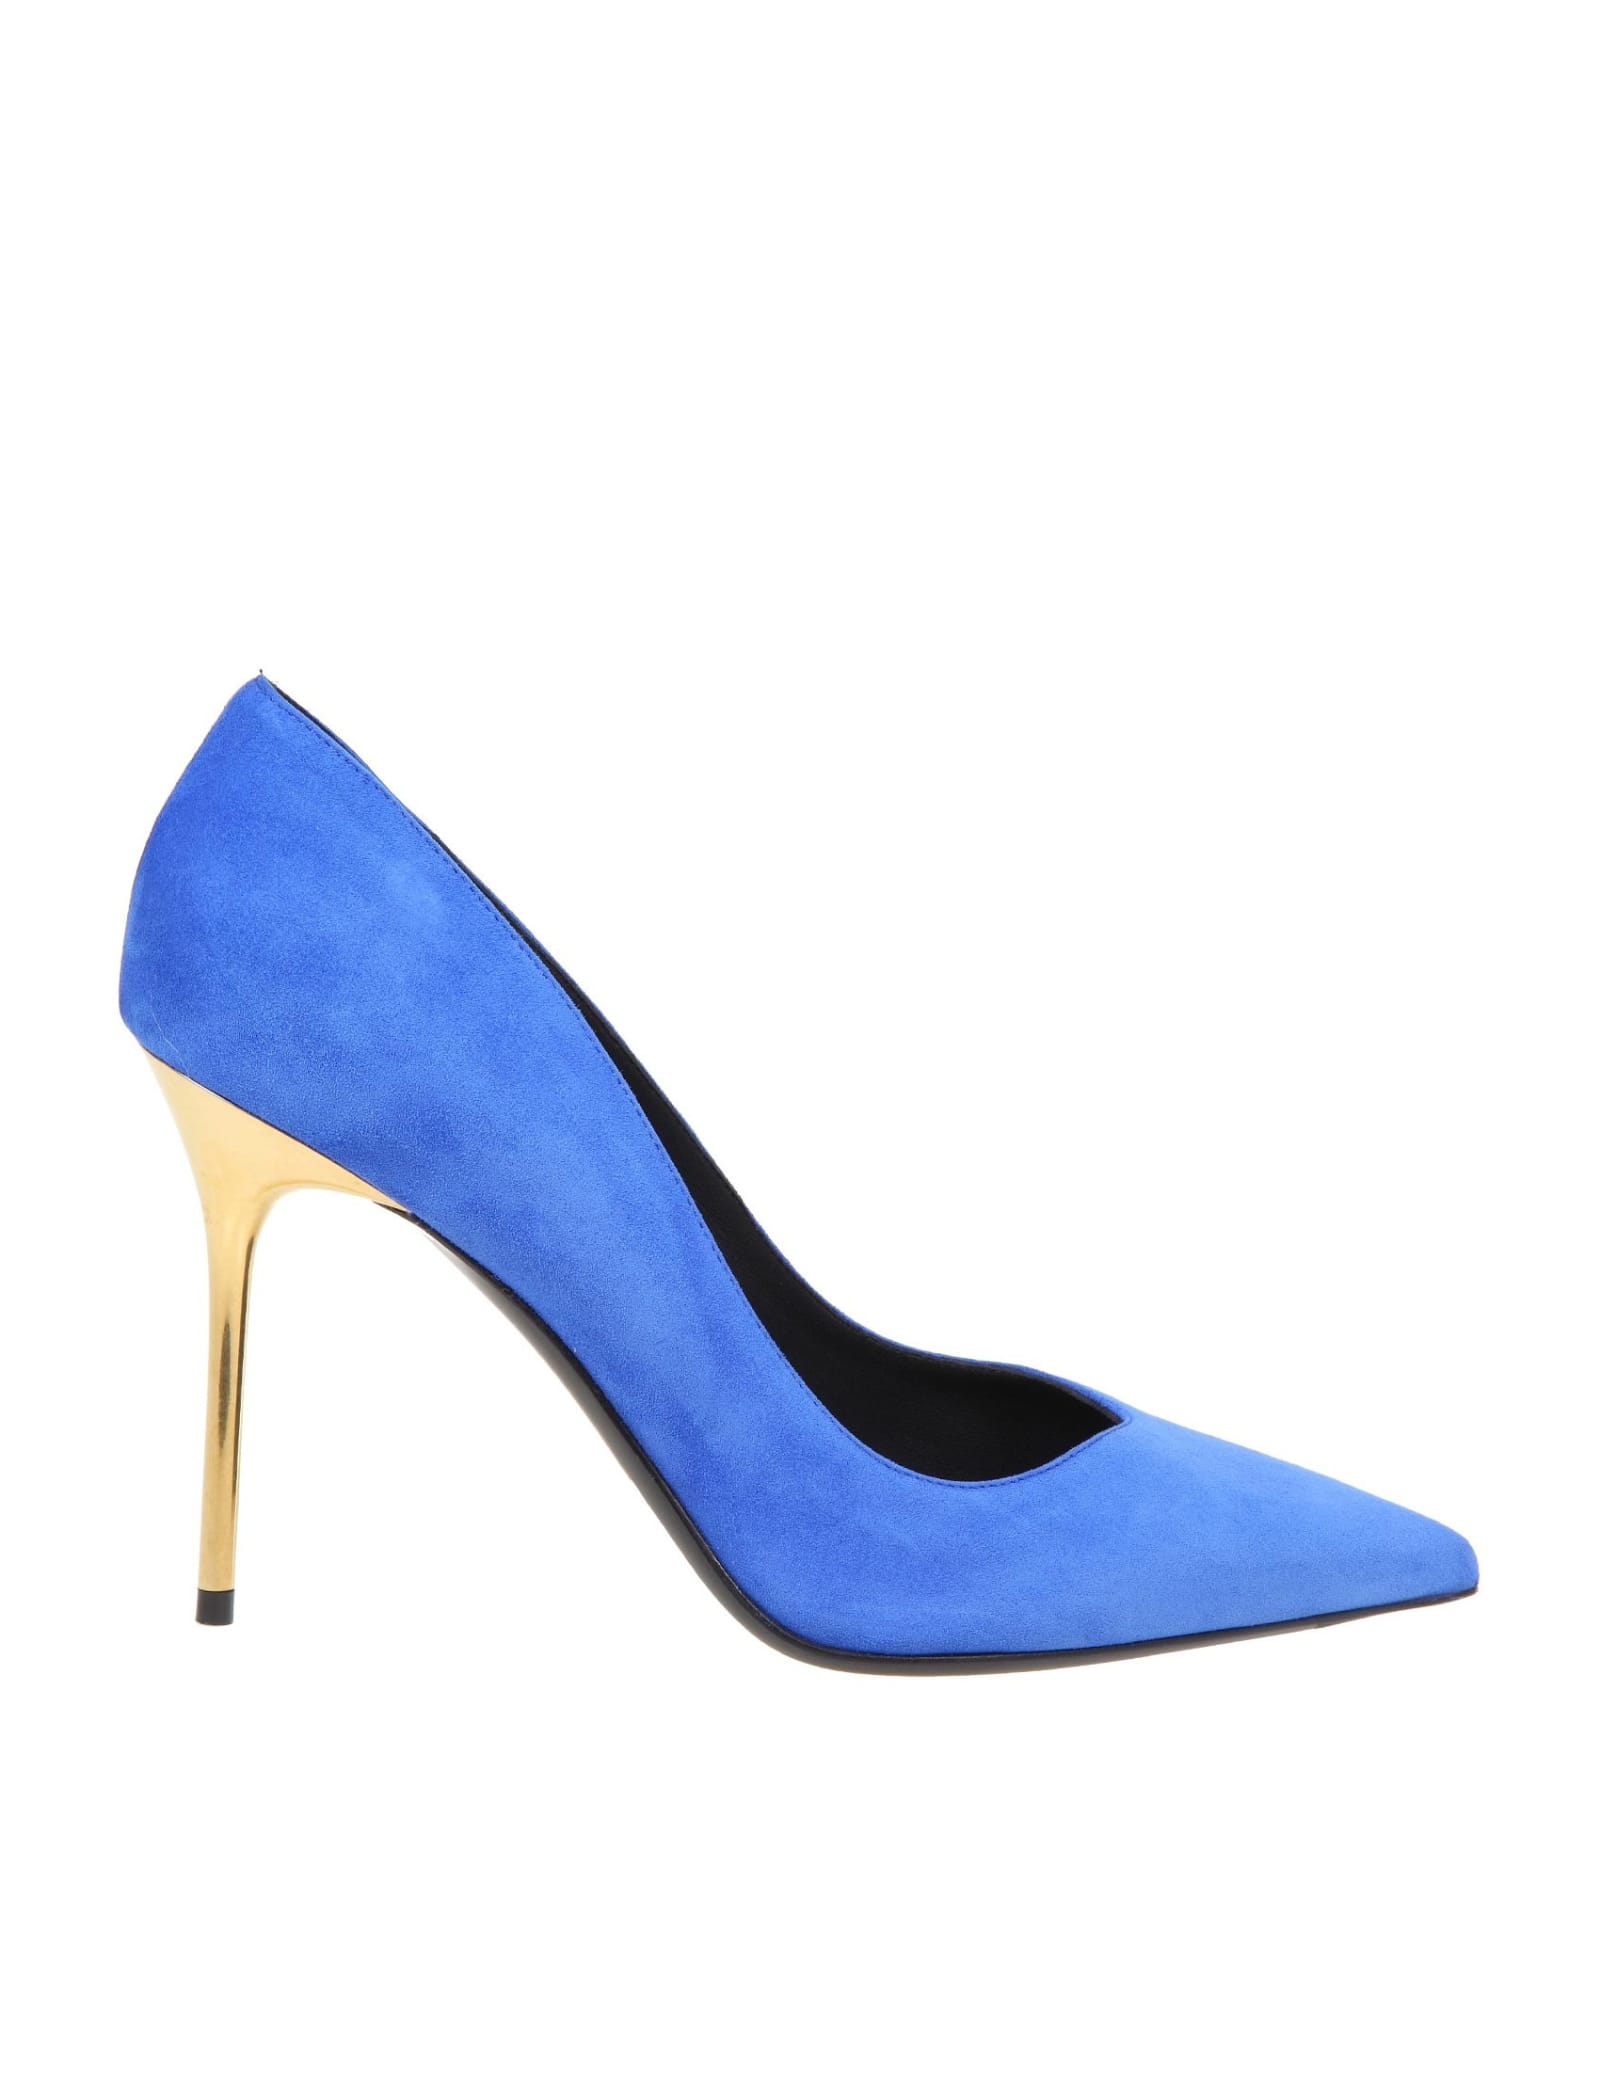 Buy Balmain Decollete In Suede And Cobalt Color online, shop Balmain shoes with free shipping